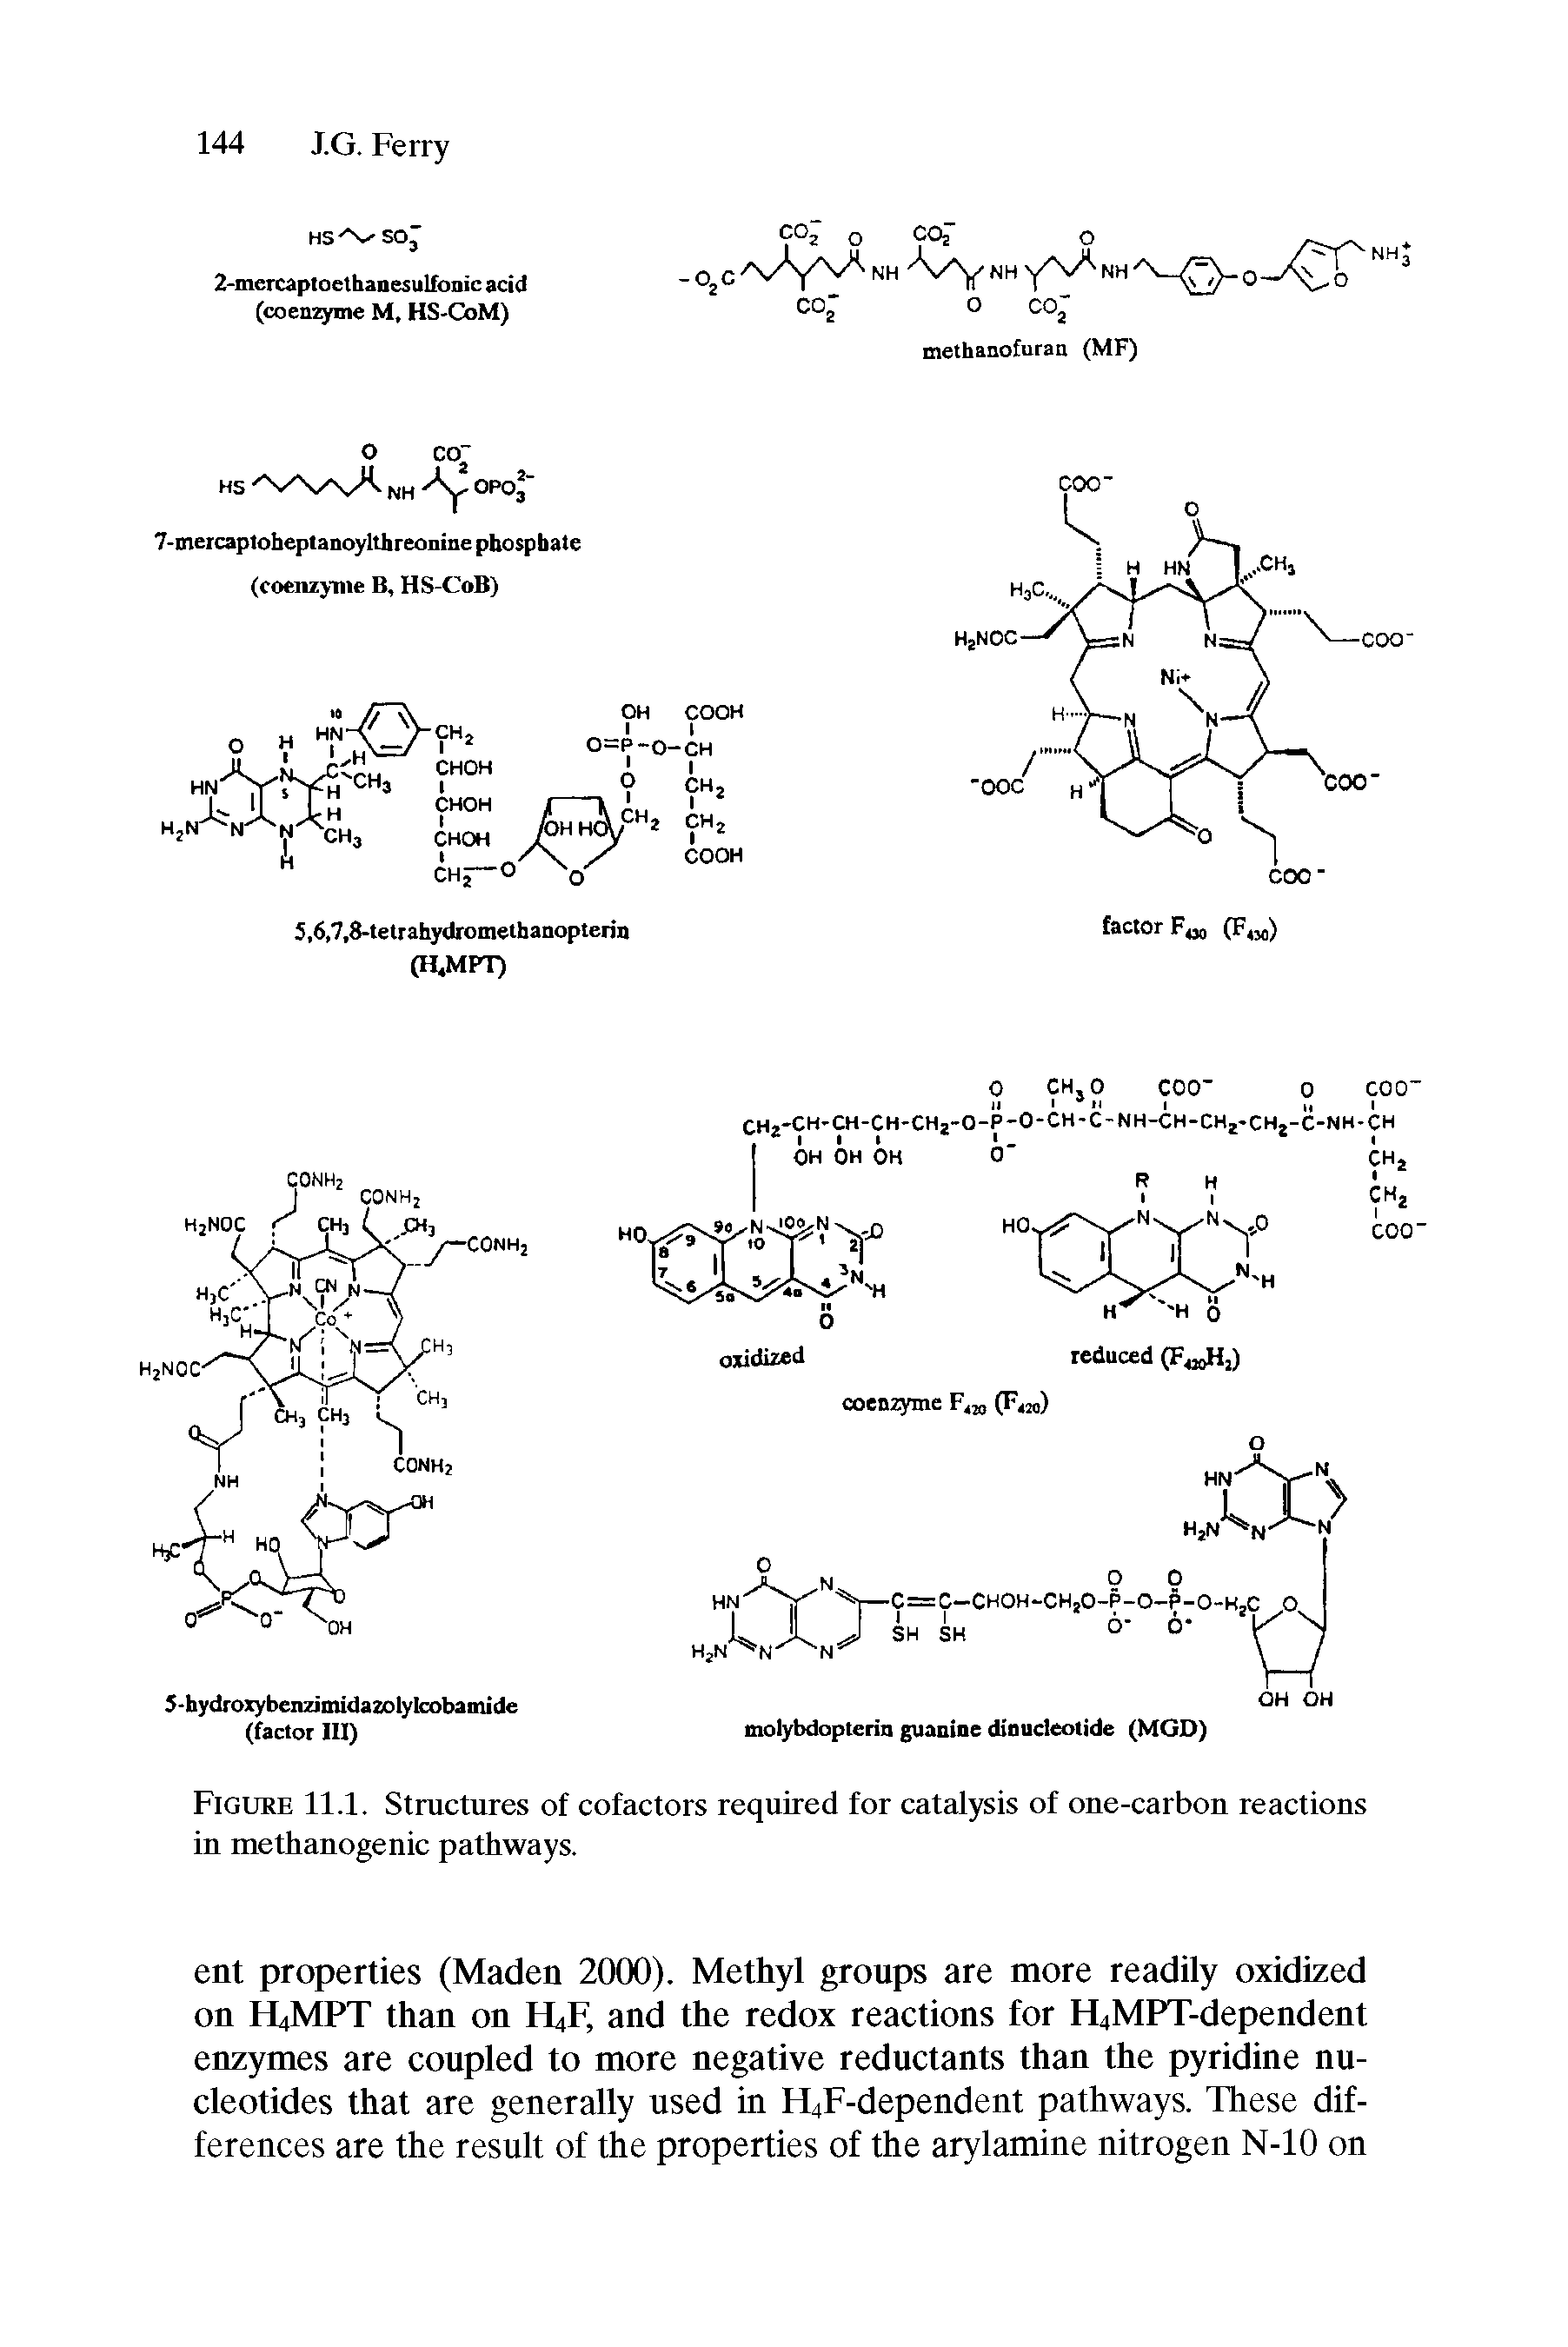 Figure 11.1. Structures of cofactors required for catalysis of one-carbon reactions in methanogenic pathways.